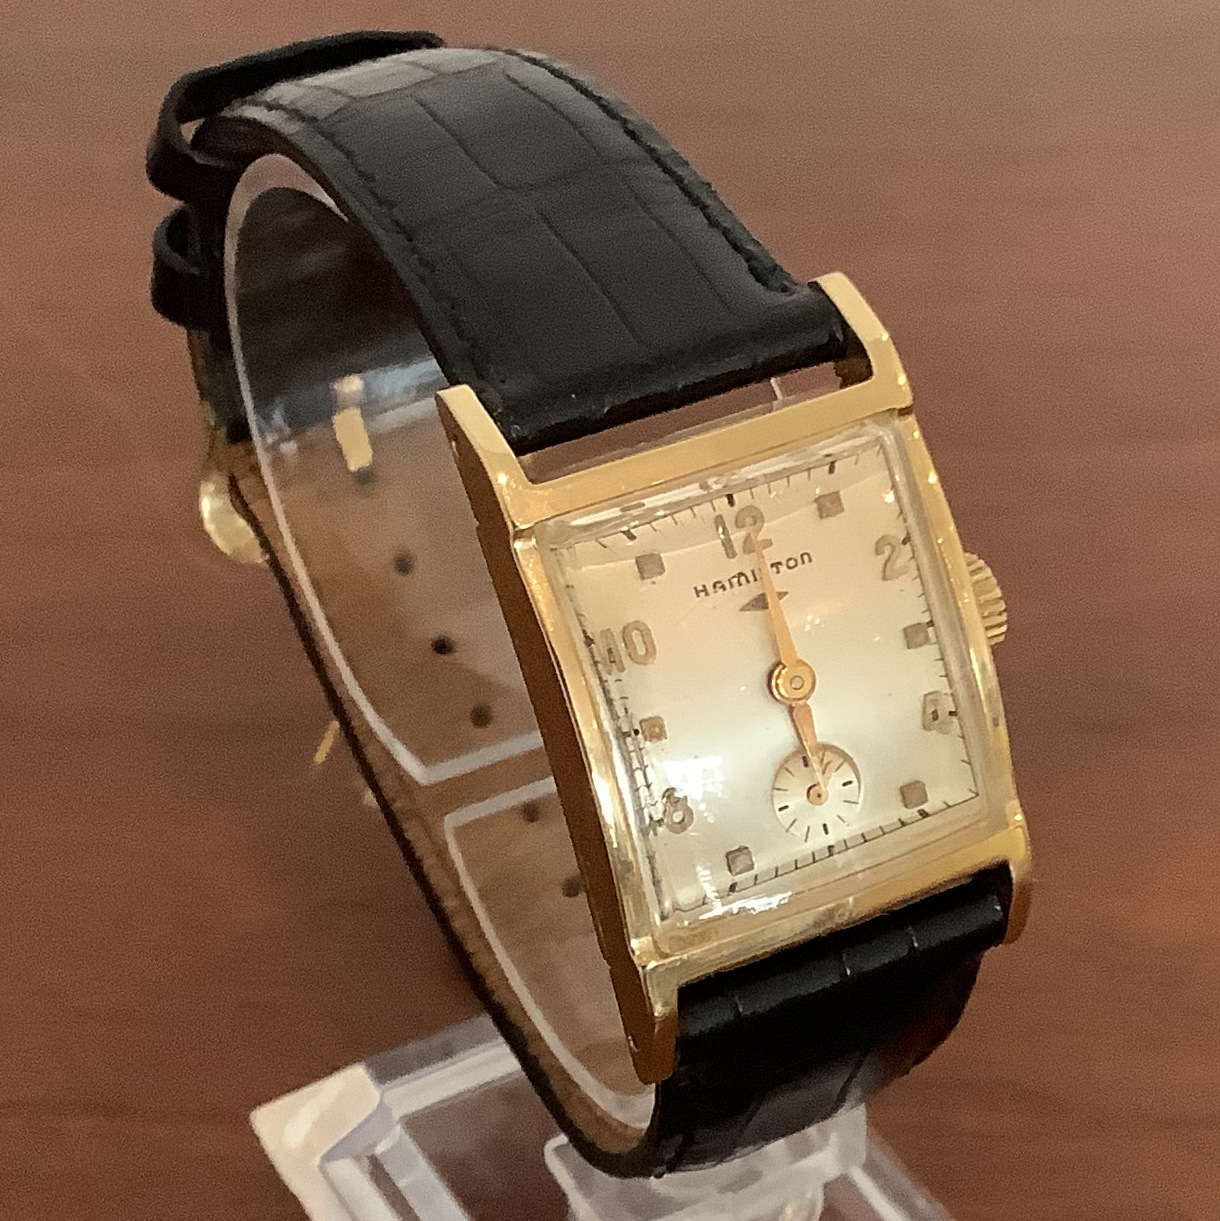 Hamilton rectangular case watch in 14 karat gold, 35 by 22 millimetres, with high-domed cylindrical crystal with black leather band